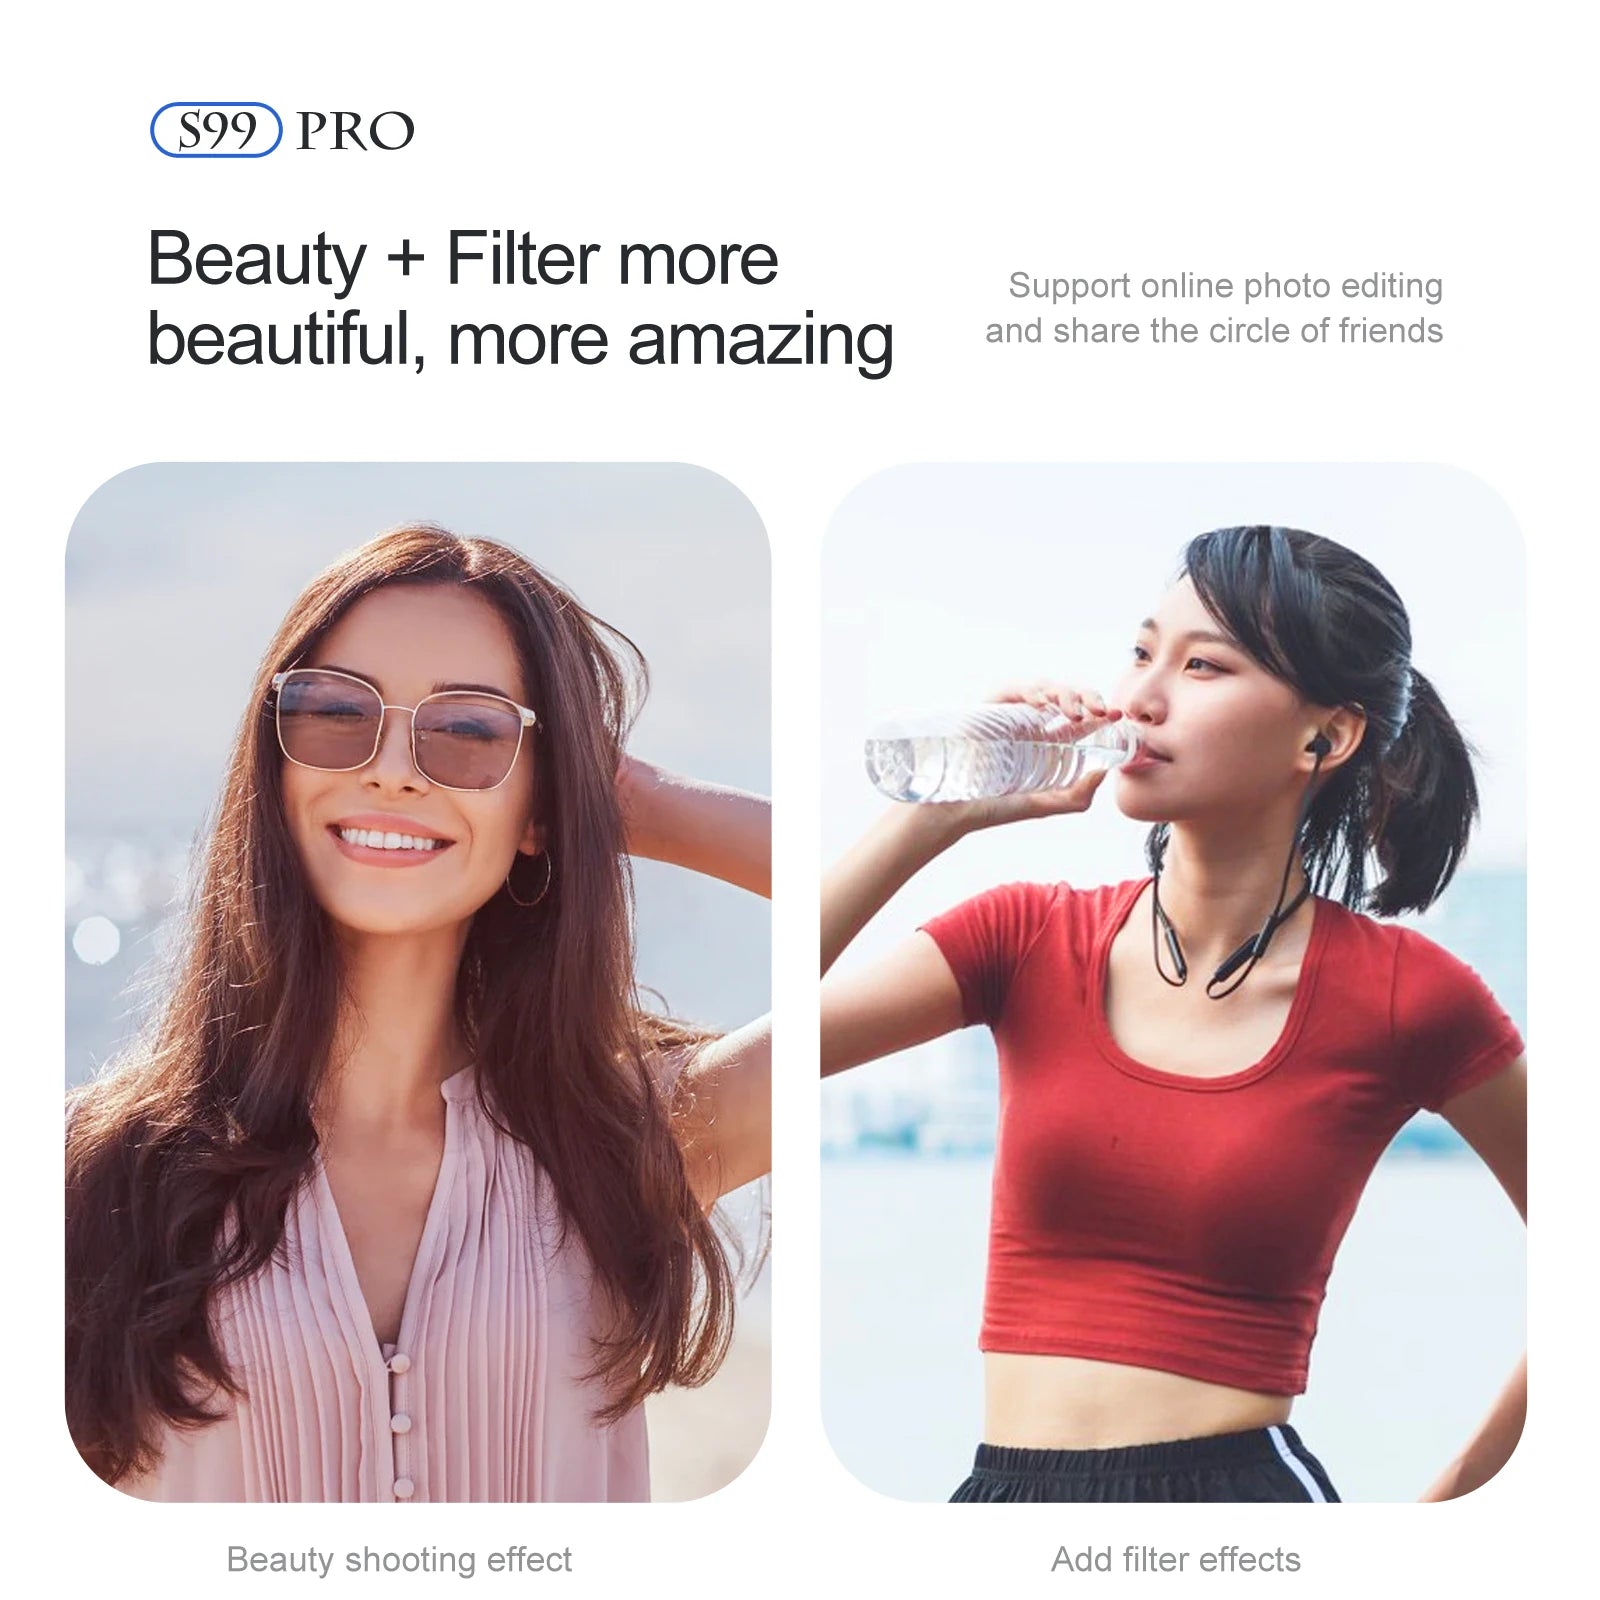 S99 Drone, s99 pro beauty filter more support online photo editing beautiful, more